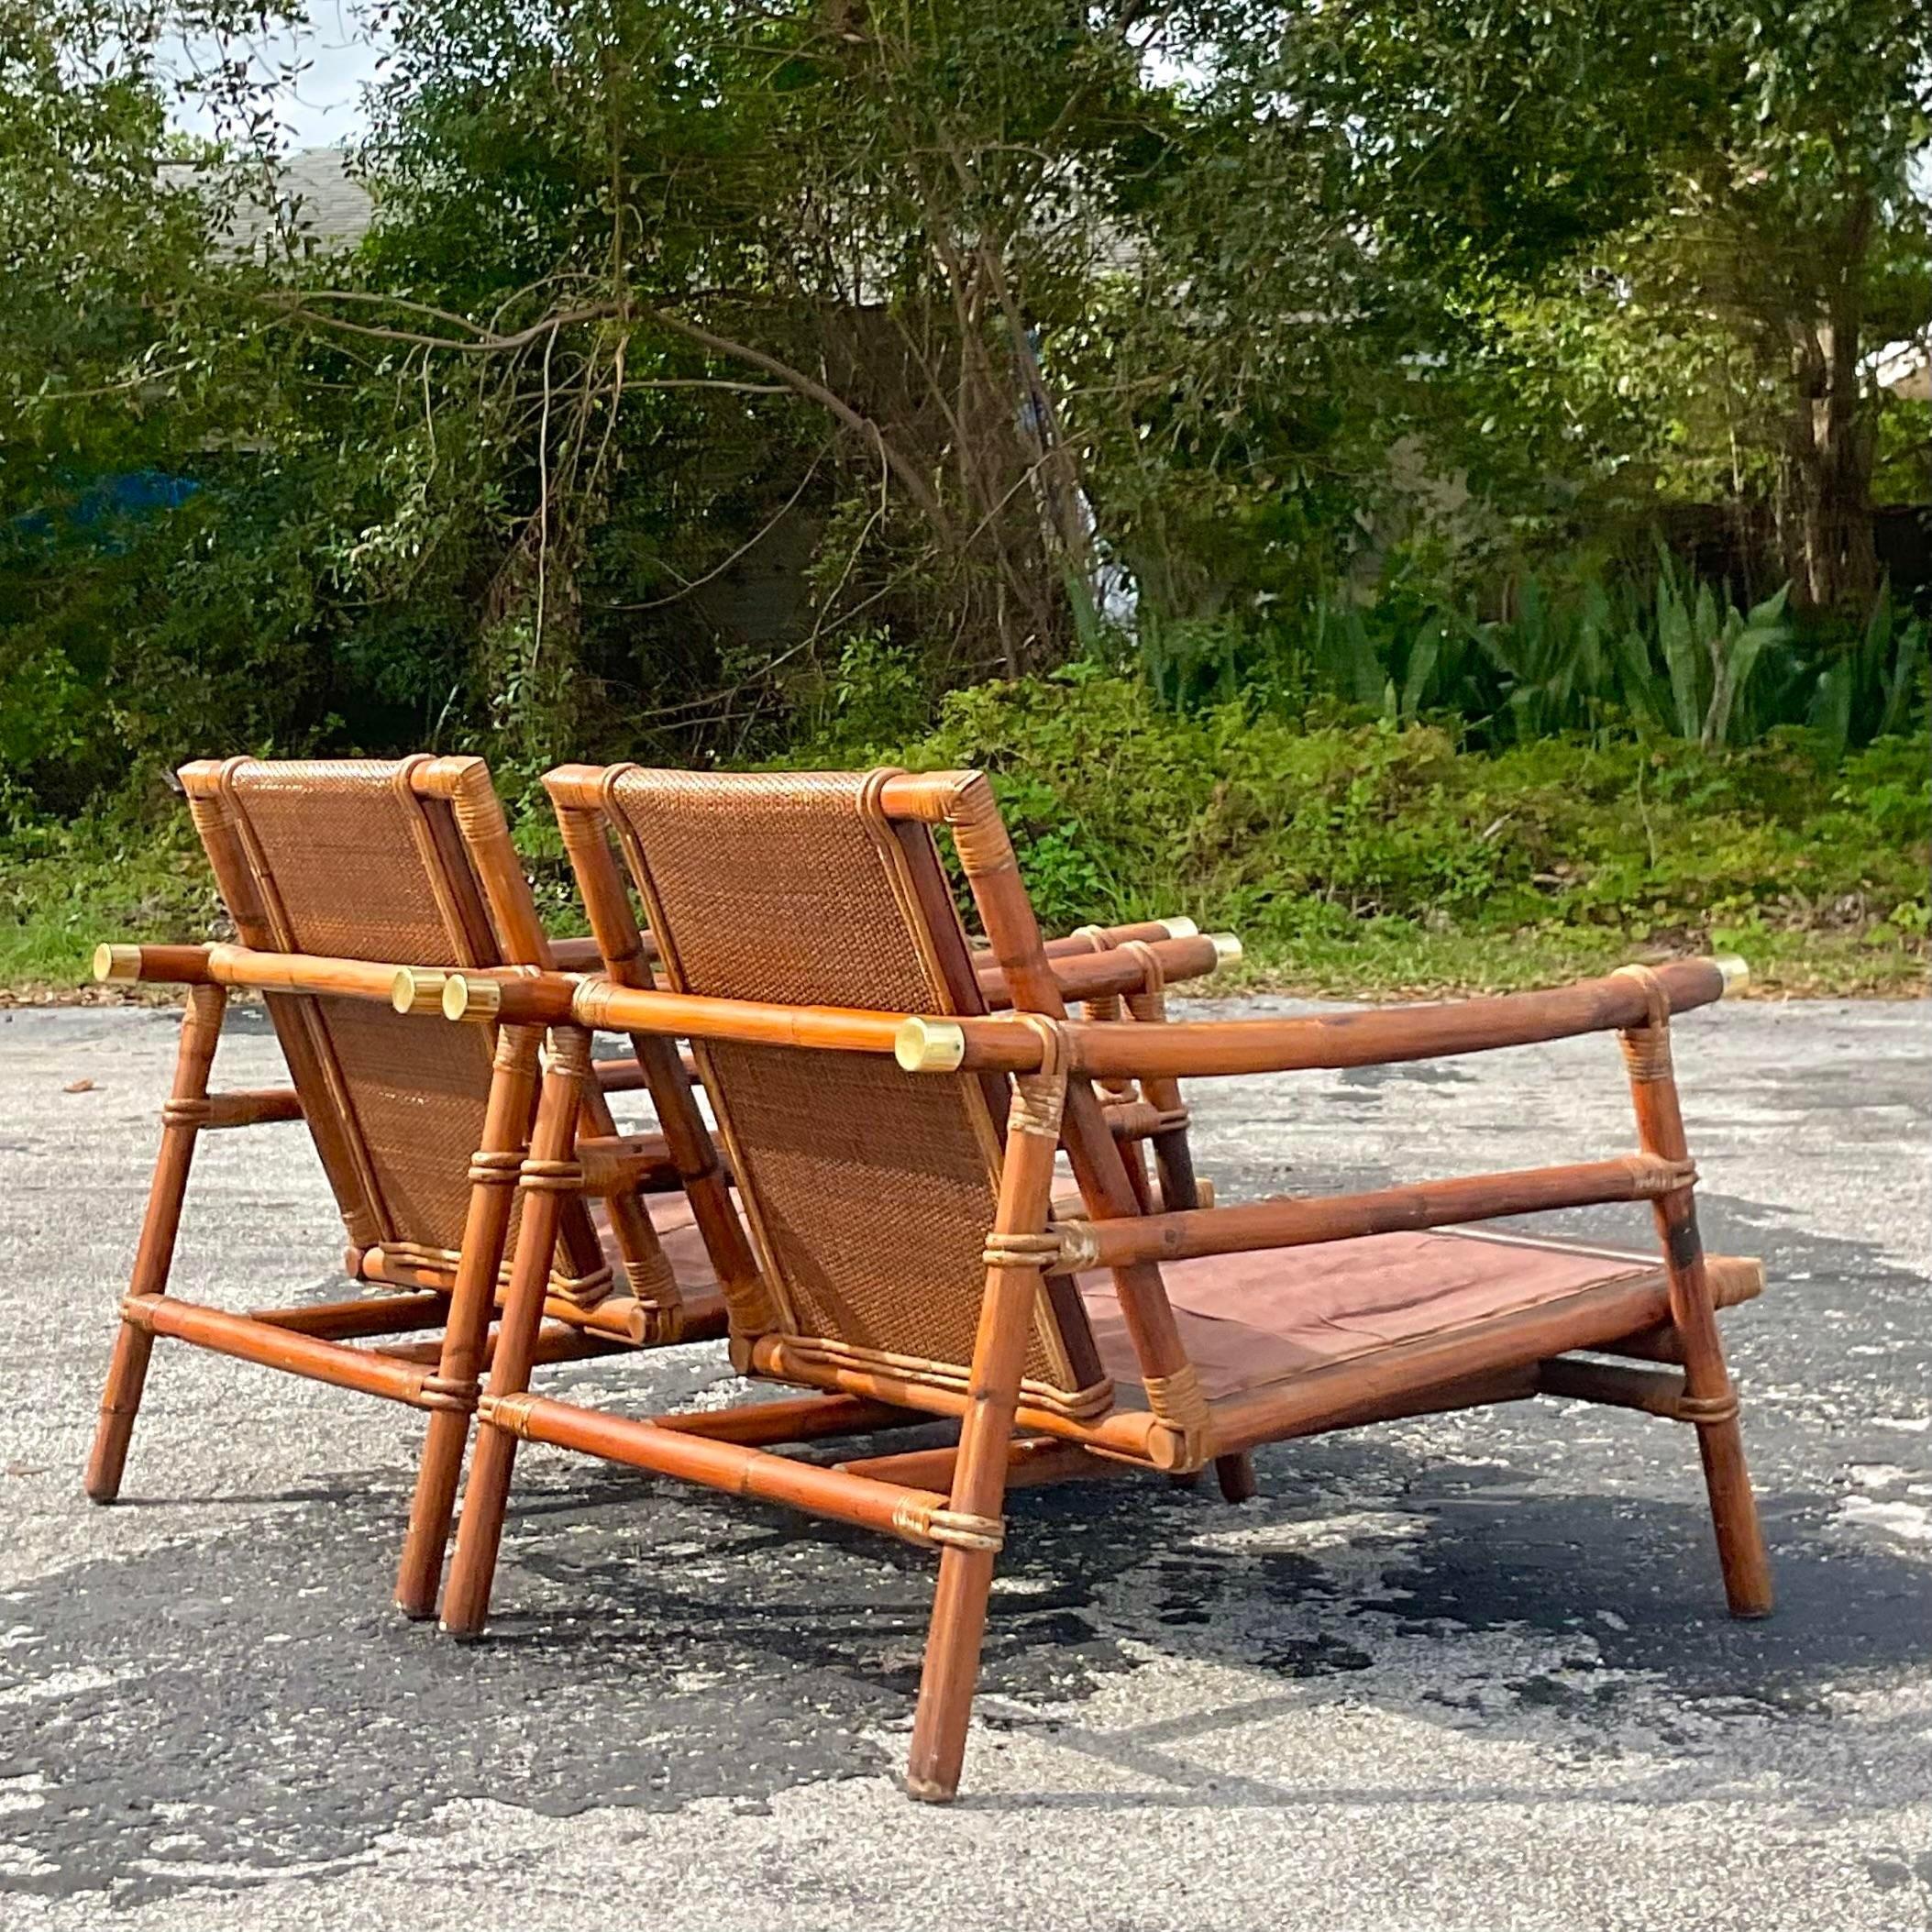 A stunning pair of vintage Coastal rattan lounge chairs. Designed by John Wisner for the iconic Ficks Reed group. Beautiful woven rattan back panels and a sloped pagoda arm with brass end caps. Tagged on the seat frame. Acquired from a Palm Beach